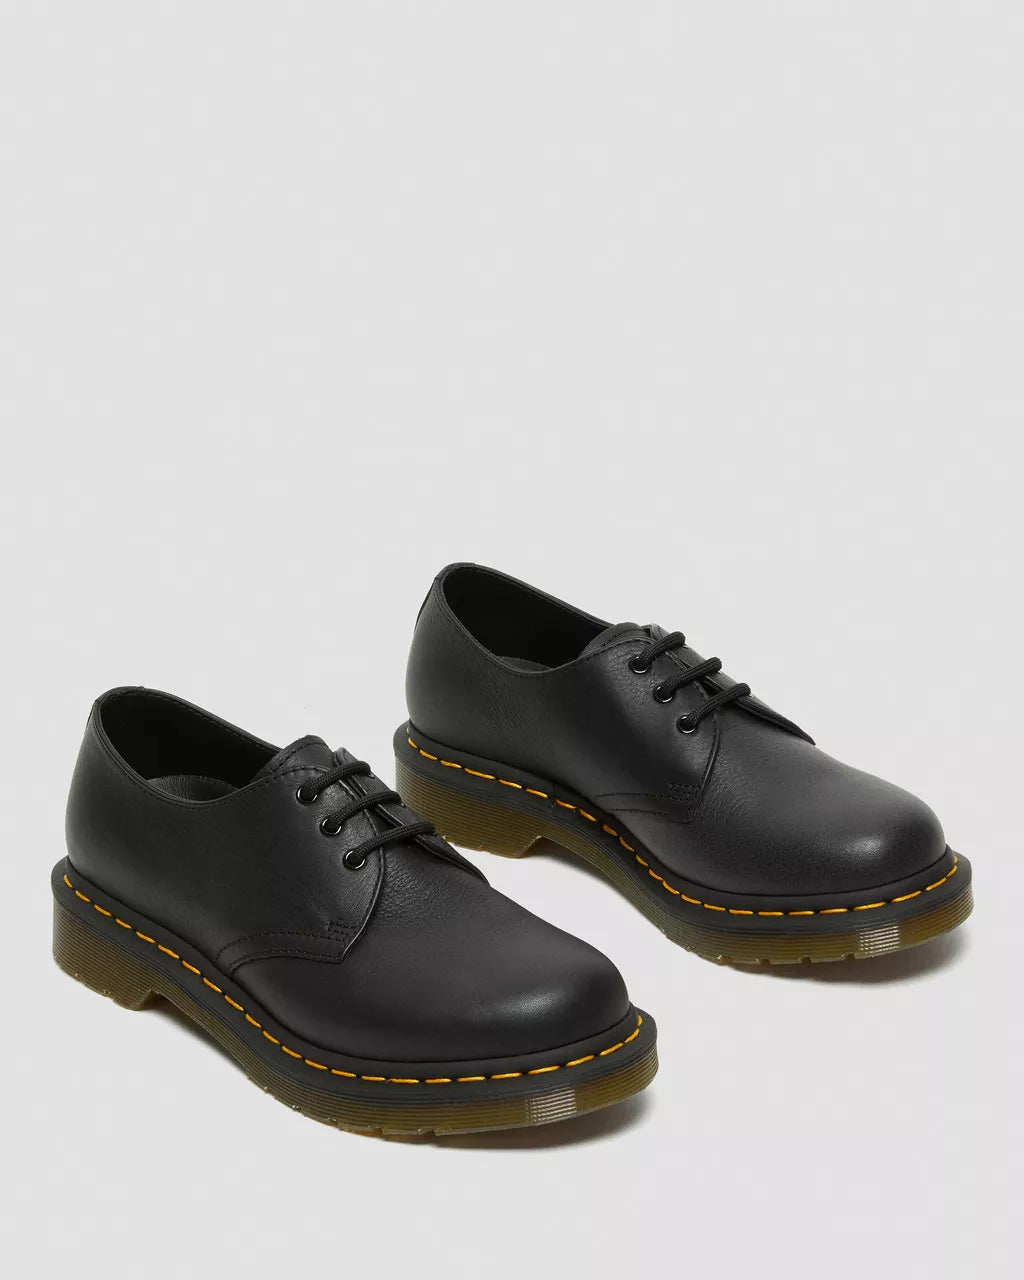 1461 Virginia Leather Oxford Shoes